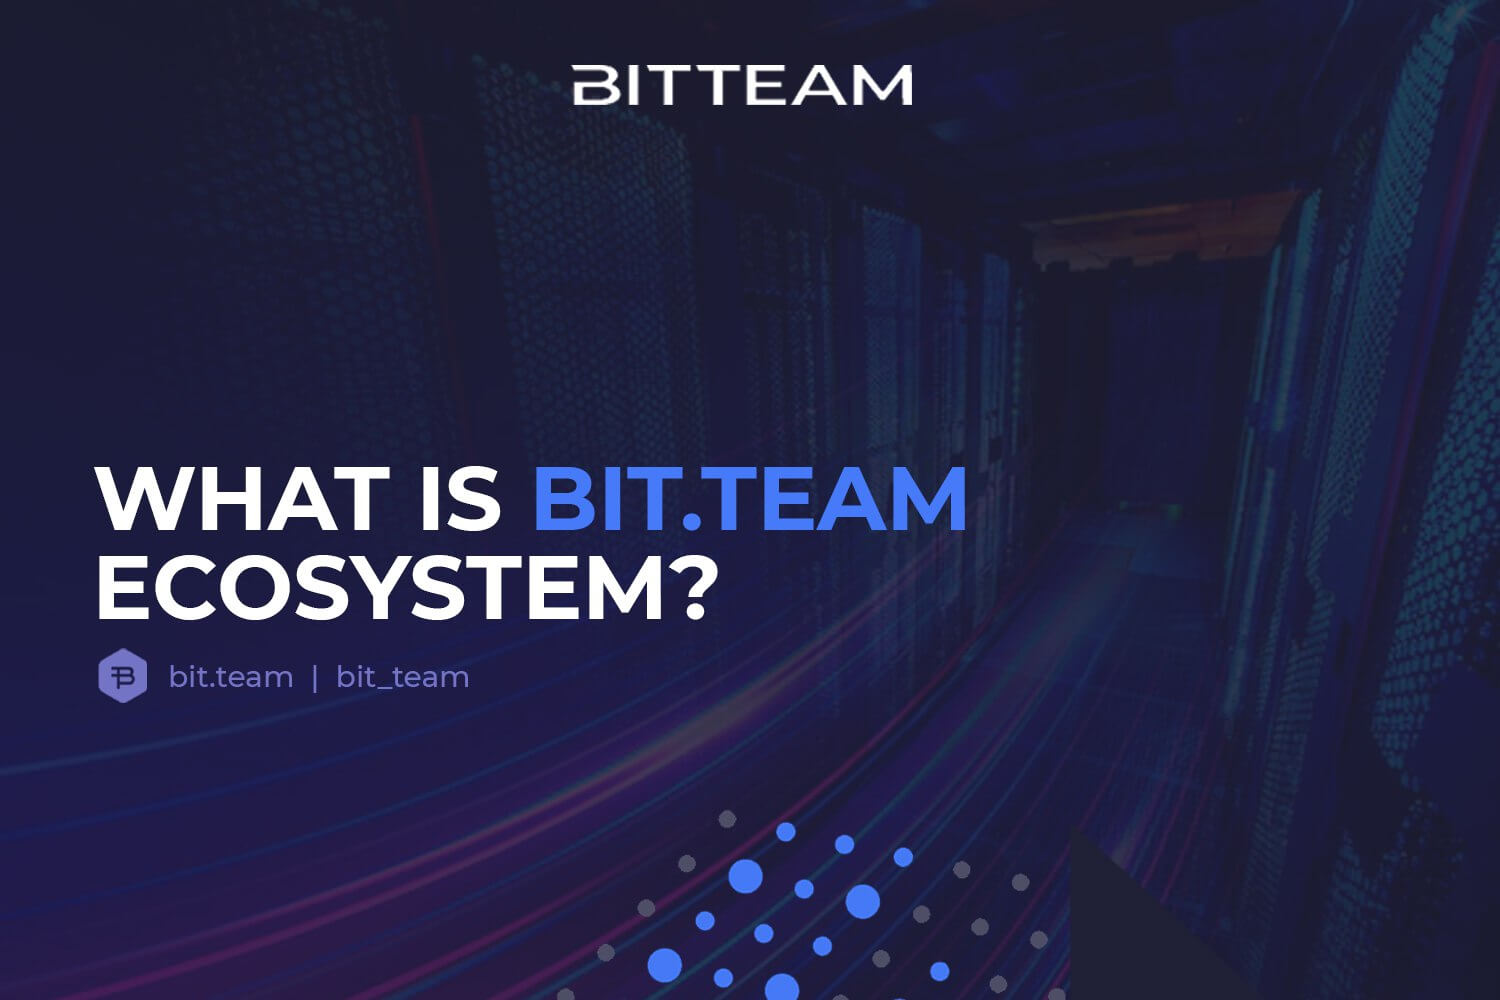 What is the BIT.TEAM ecosystem?